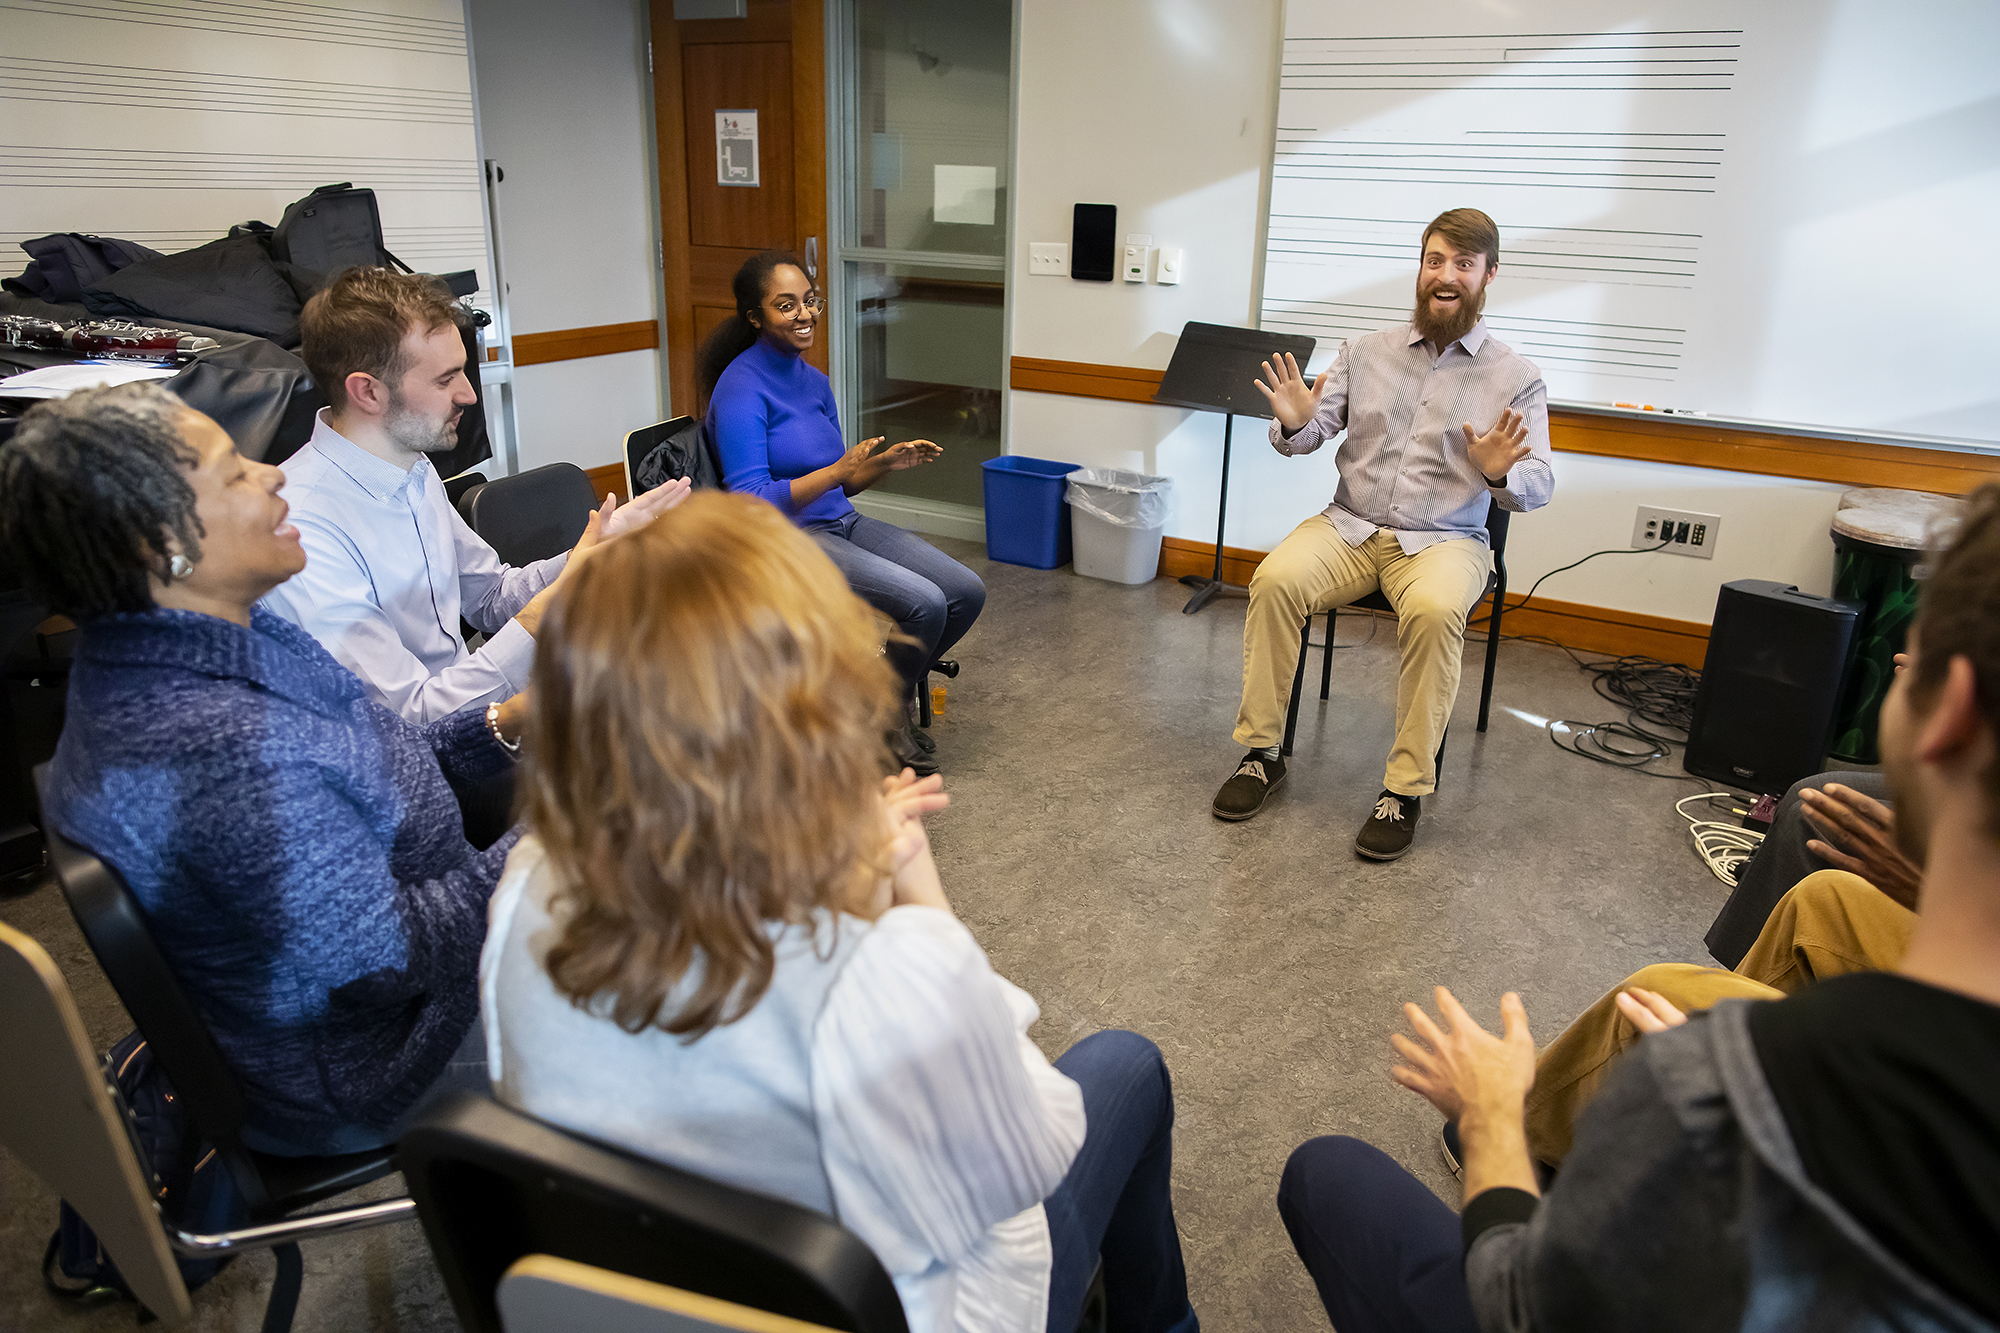  Nick leads a body percussion exercise during a Creative Expression Through Music session. Photo by Eric Sucar/Penn University Communications. 